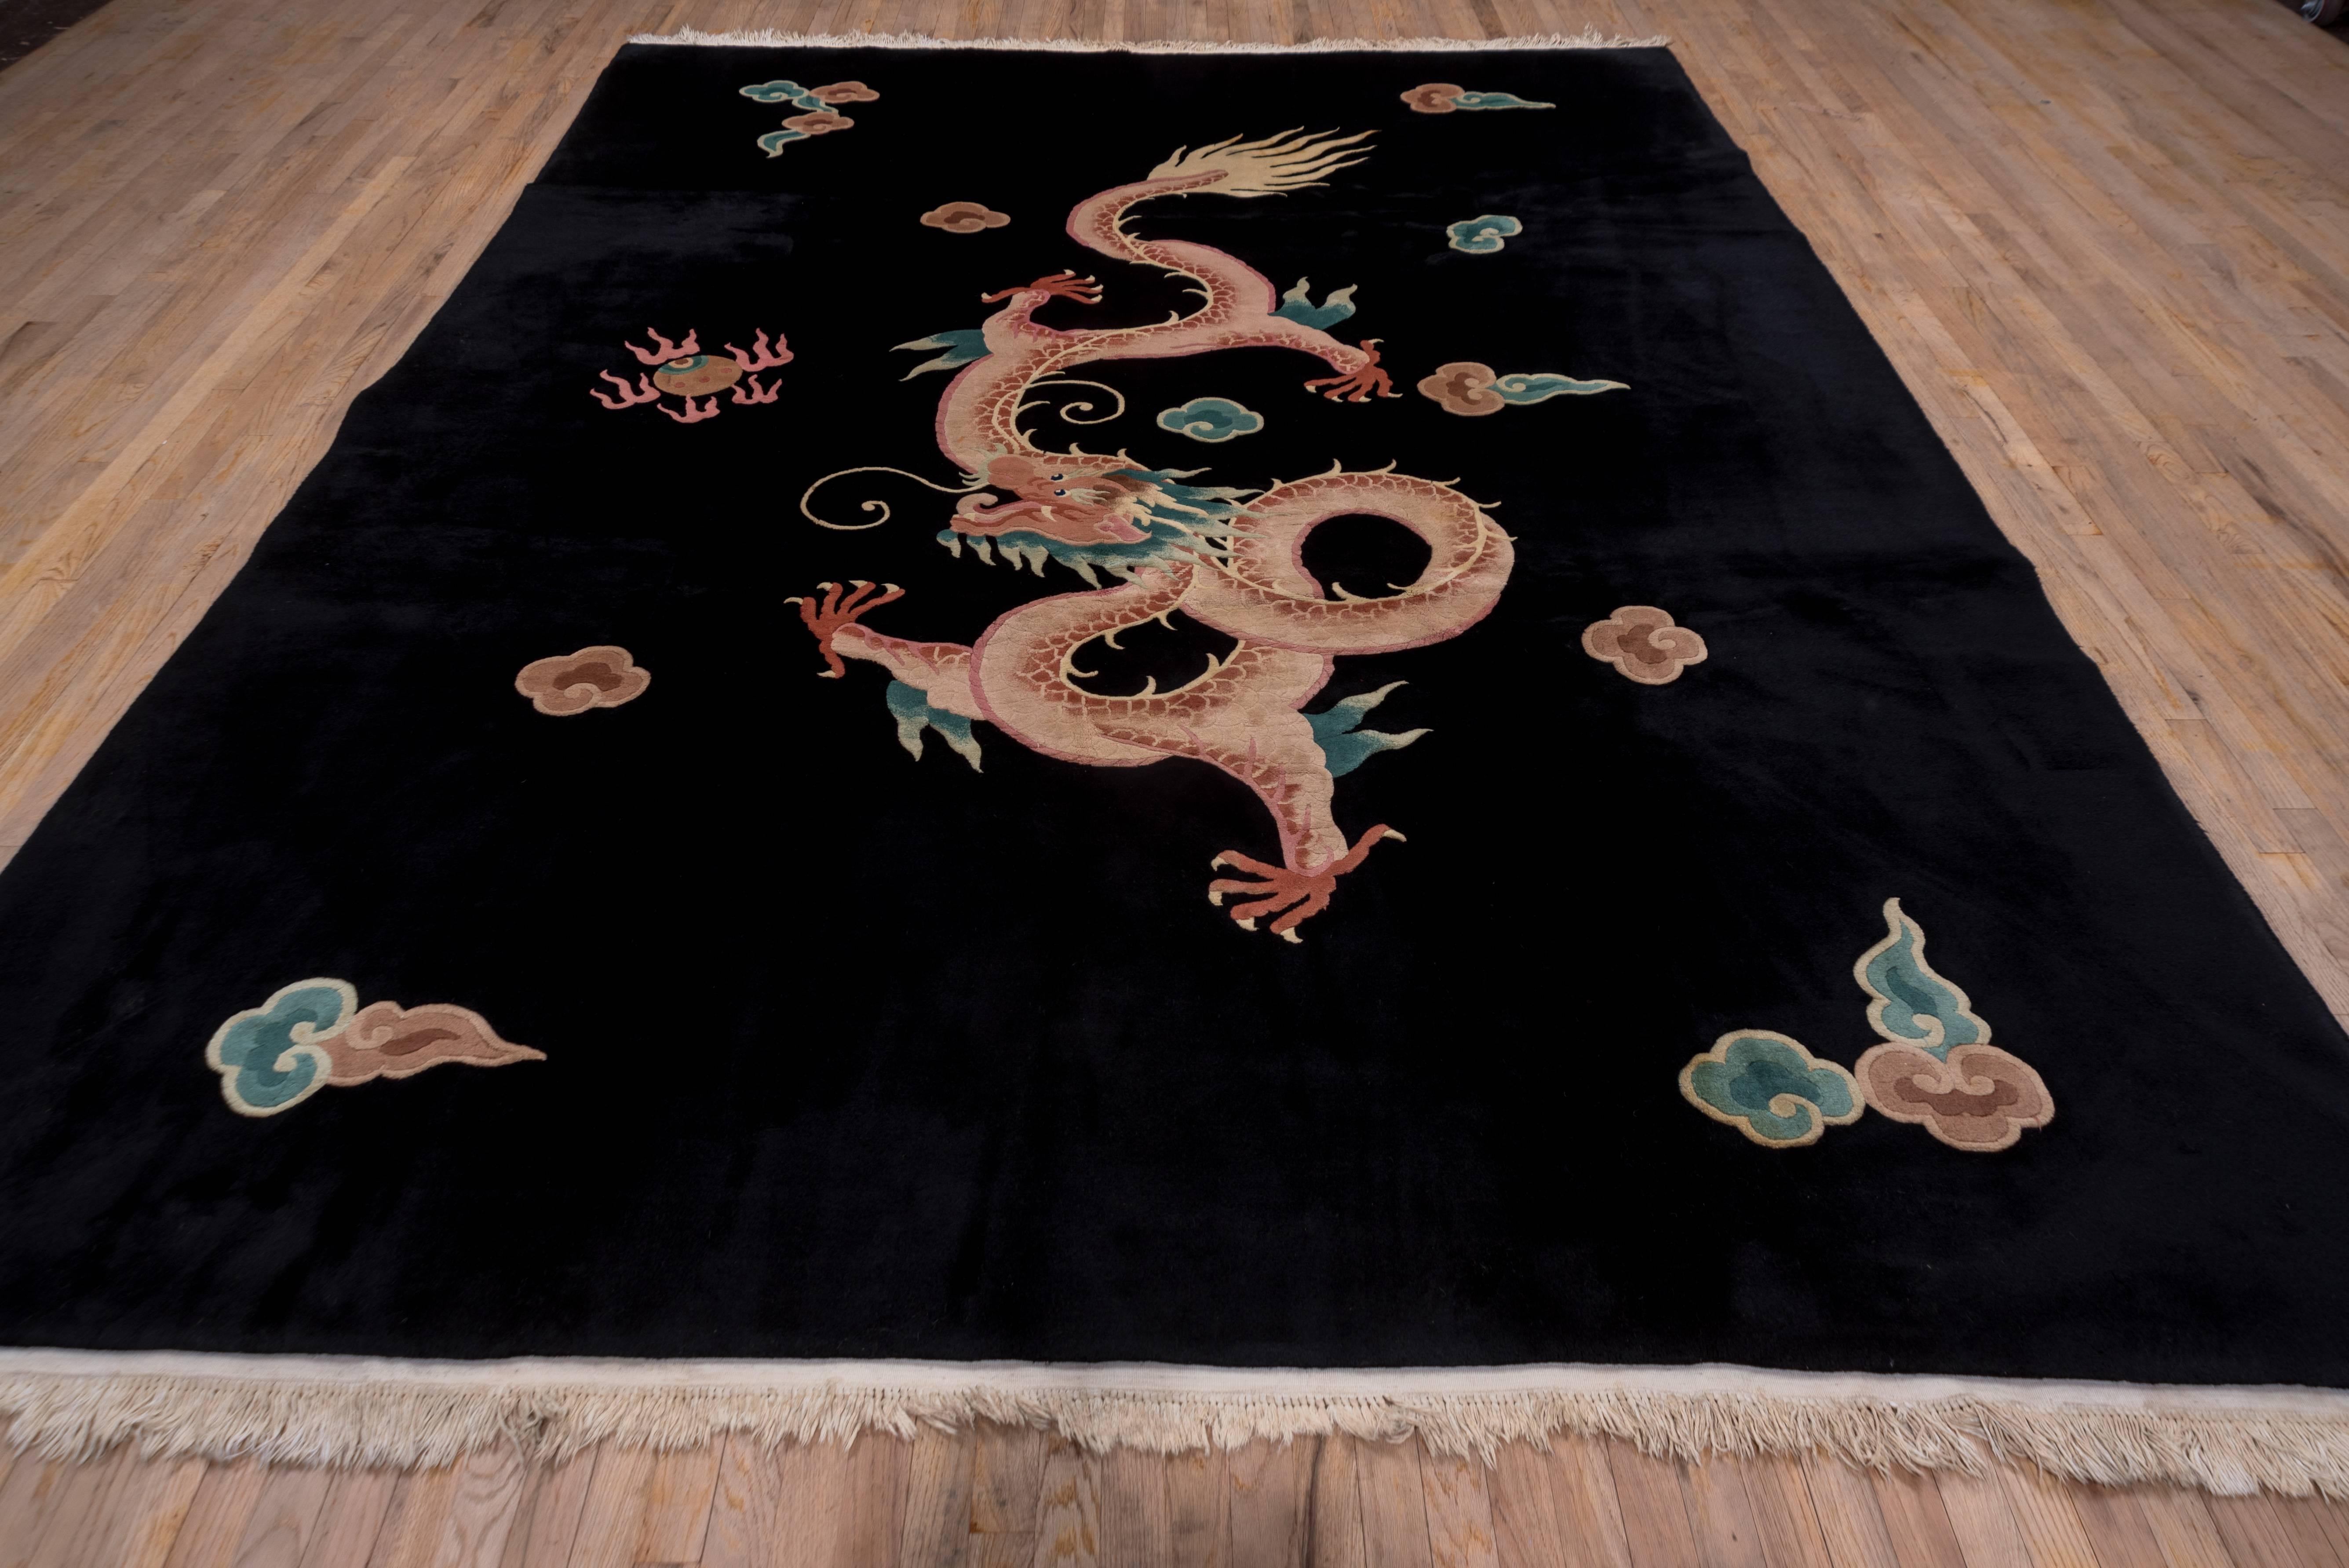 Exuberance, exoticism, wealth, abundance, these are a few of the adjectives that come to mind when thinking of the decorative arts that emerged from the Art Deco period during the 1920s. This wildly exotic Chinese carpet from the 1920s is no